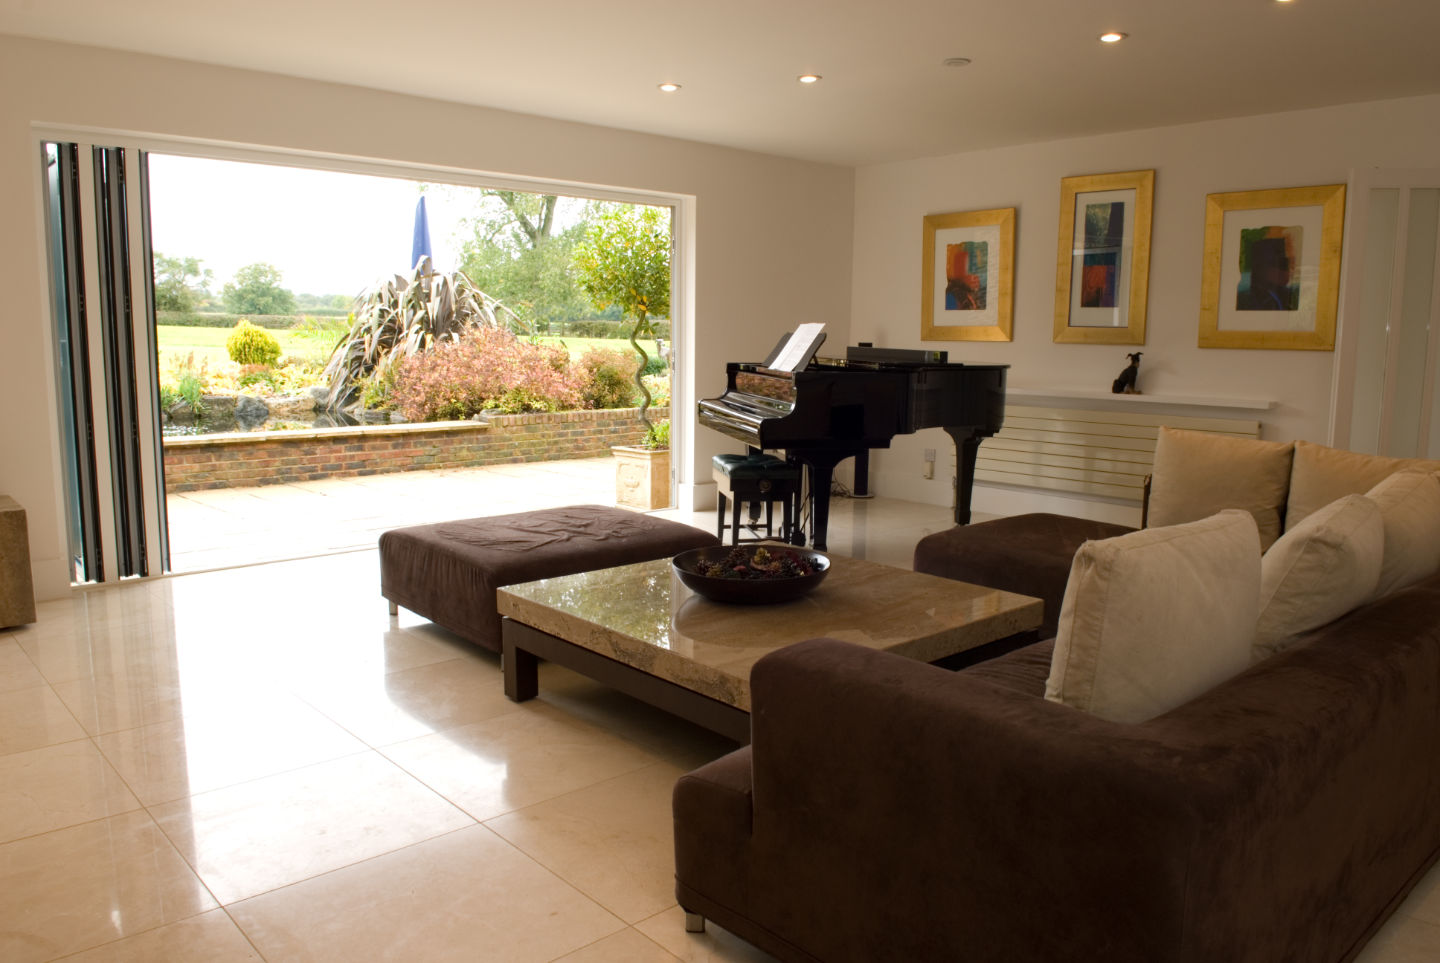 Bifolding doors in a classy living room with a grand piano